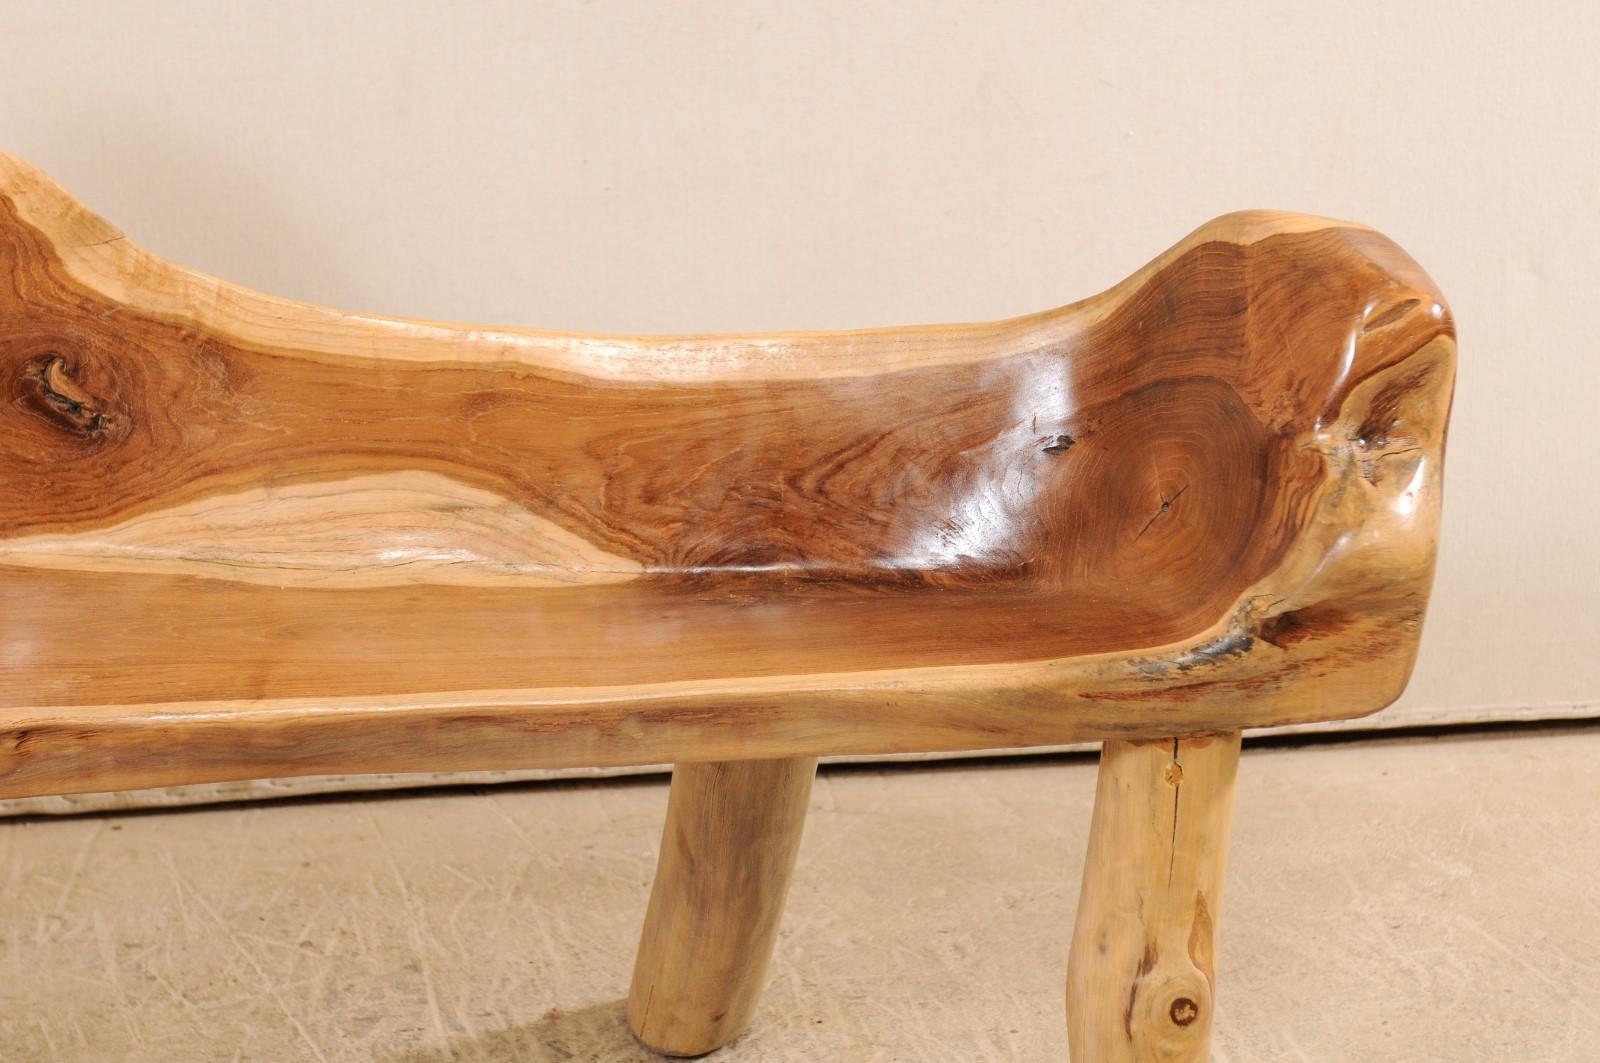 Indonesian Natural Teak Wood Bench with Live Edge and Organic Shape